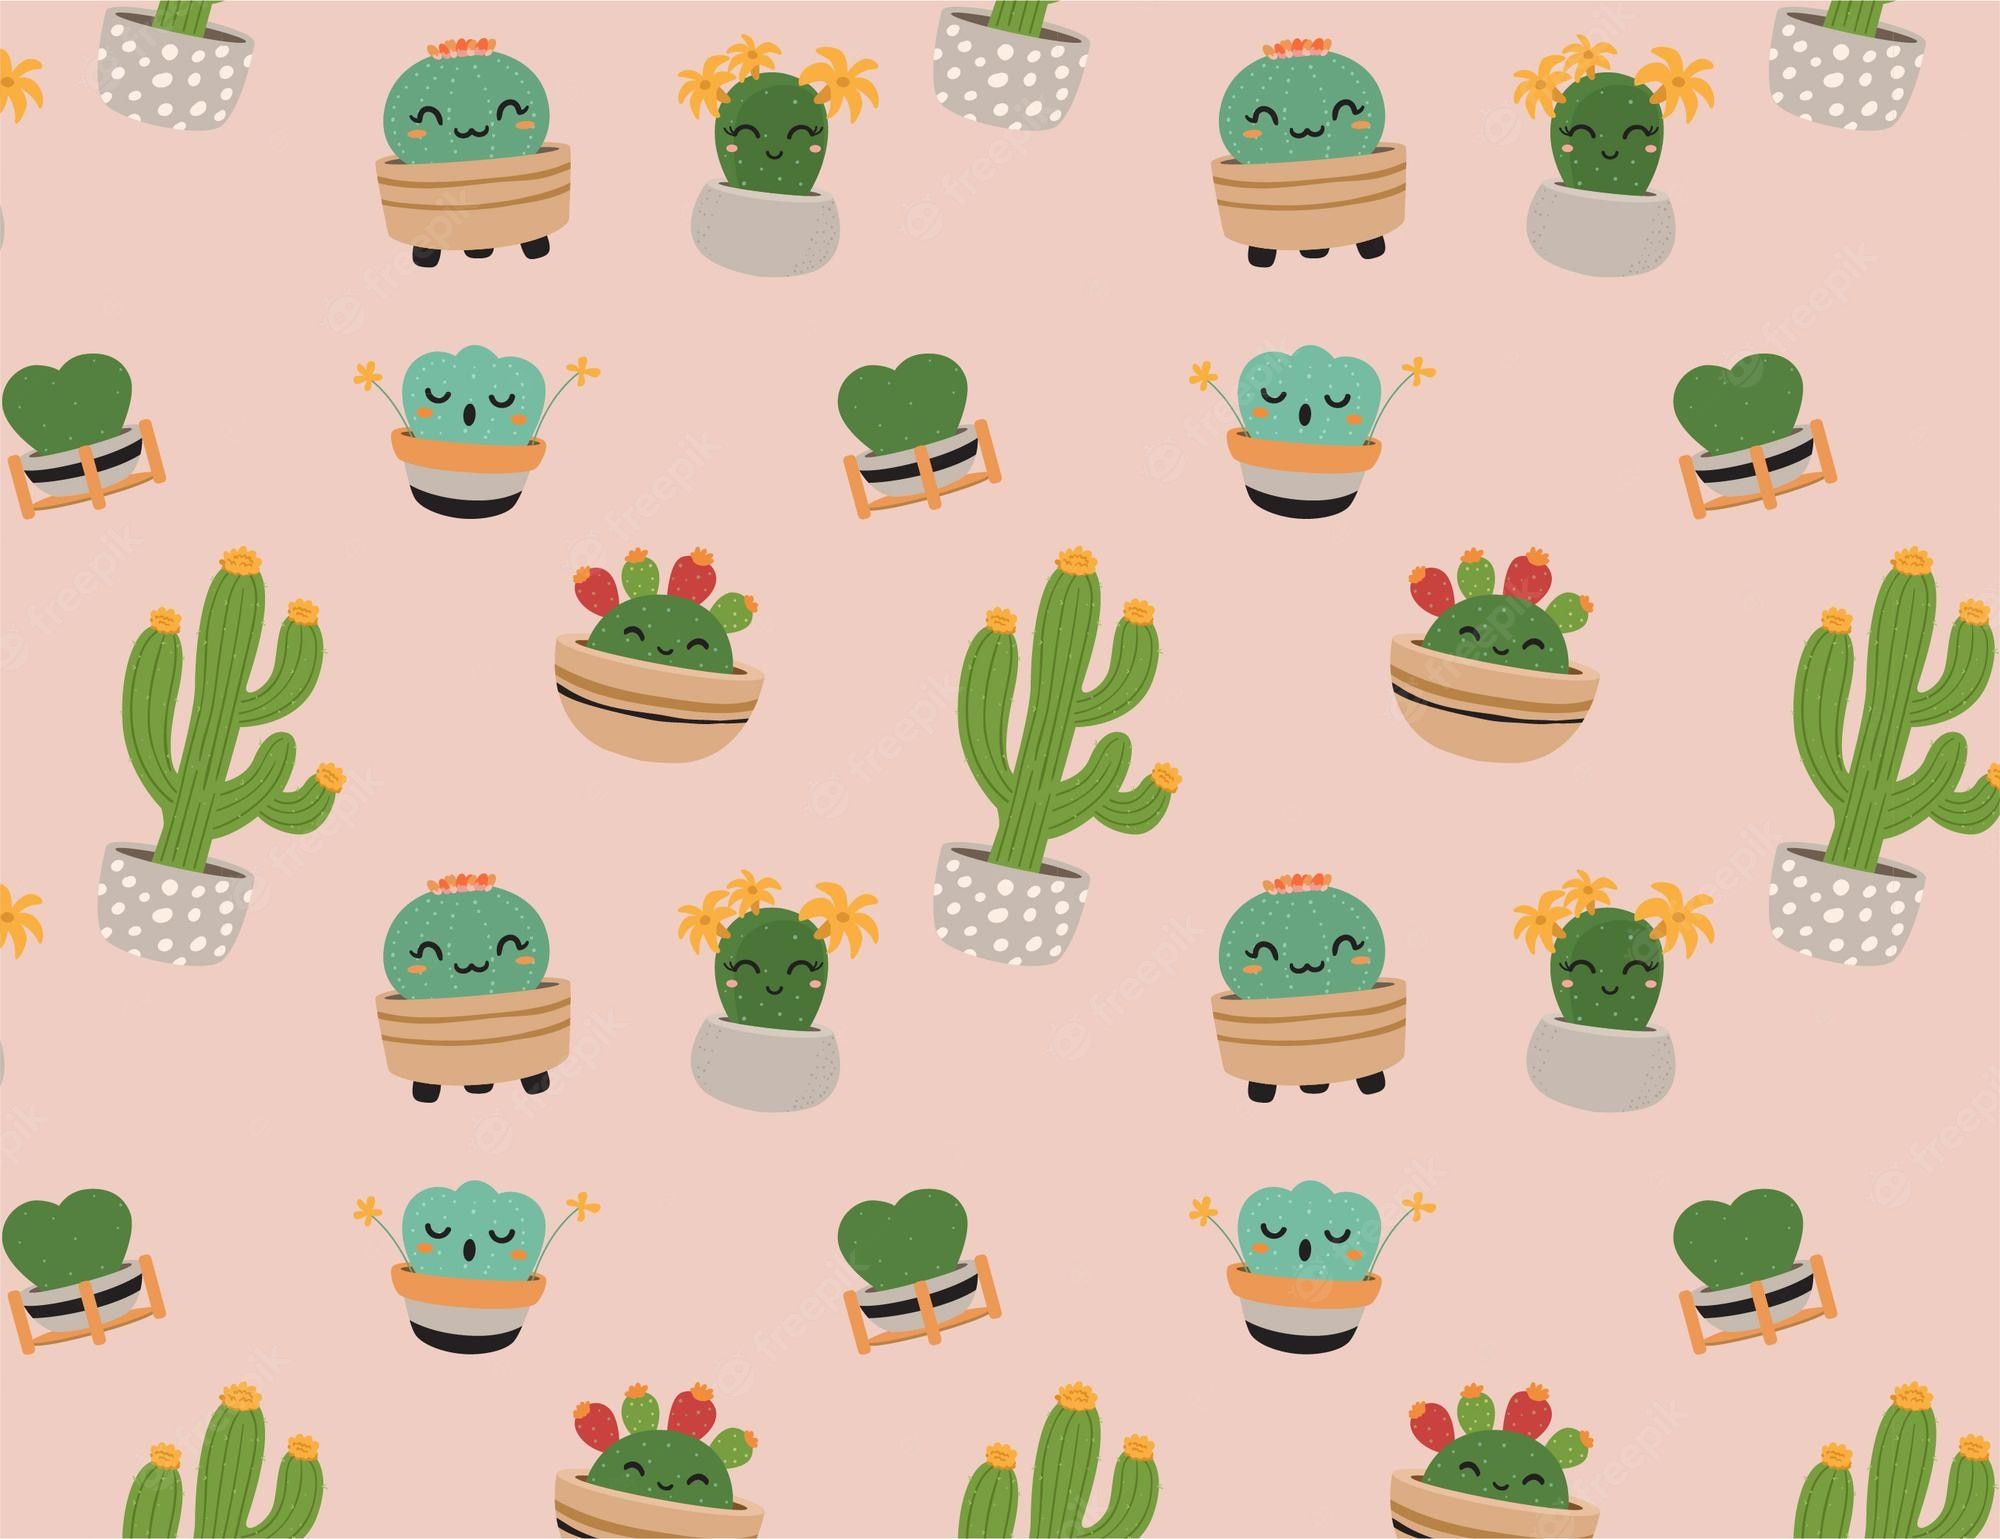 A pattern of cartoon cacti and succulents with faces on a pink background. - Cactus